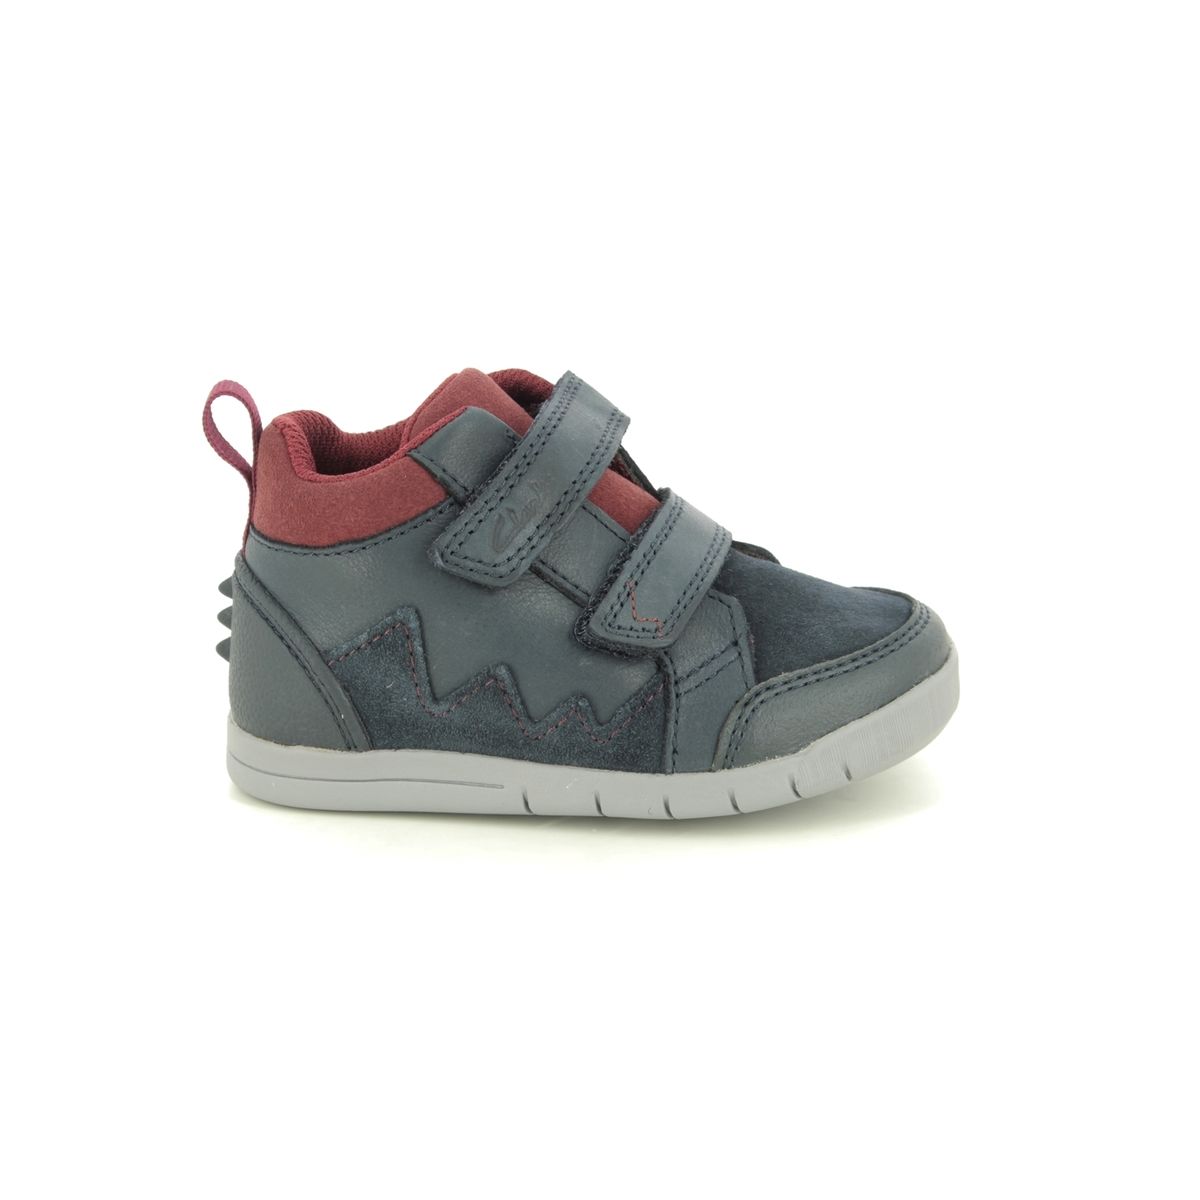 clarks baby boys shoes